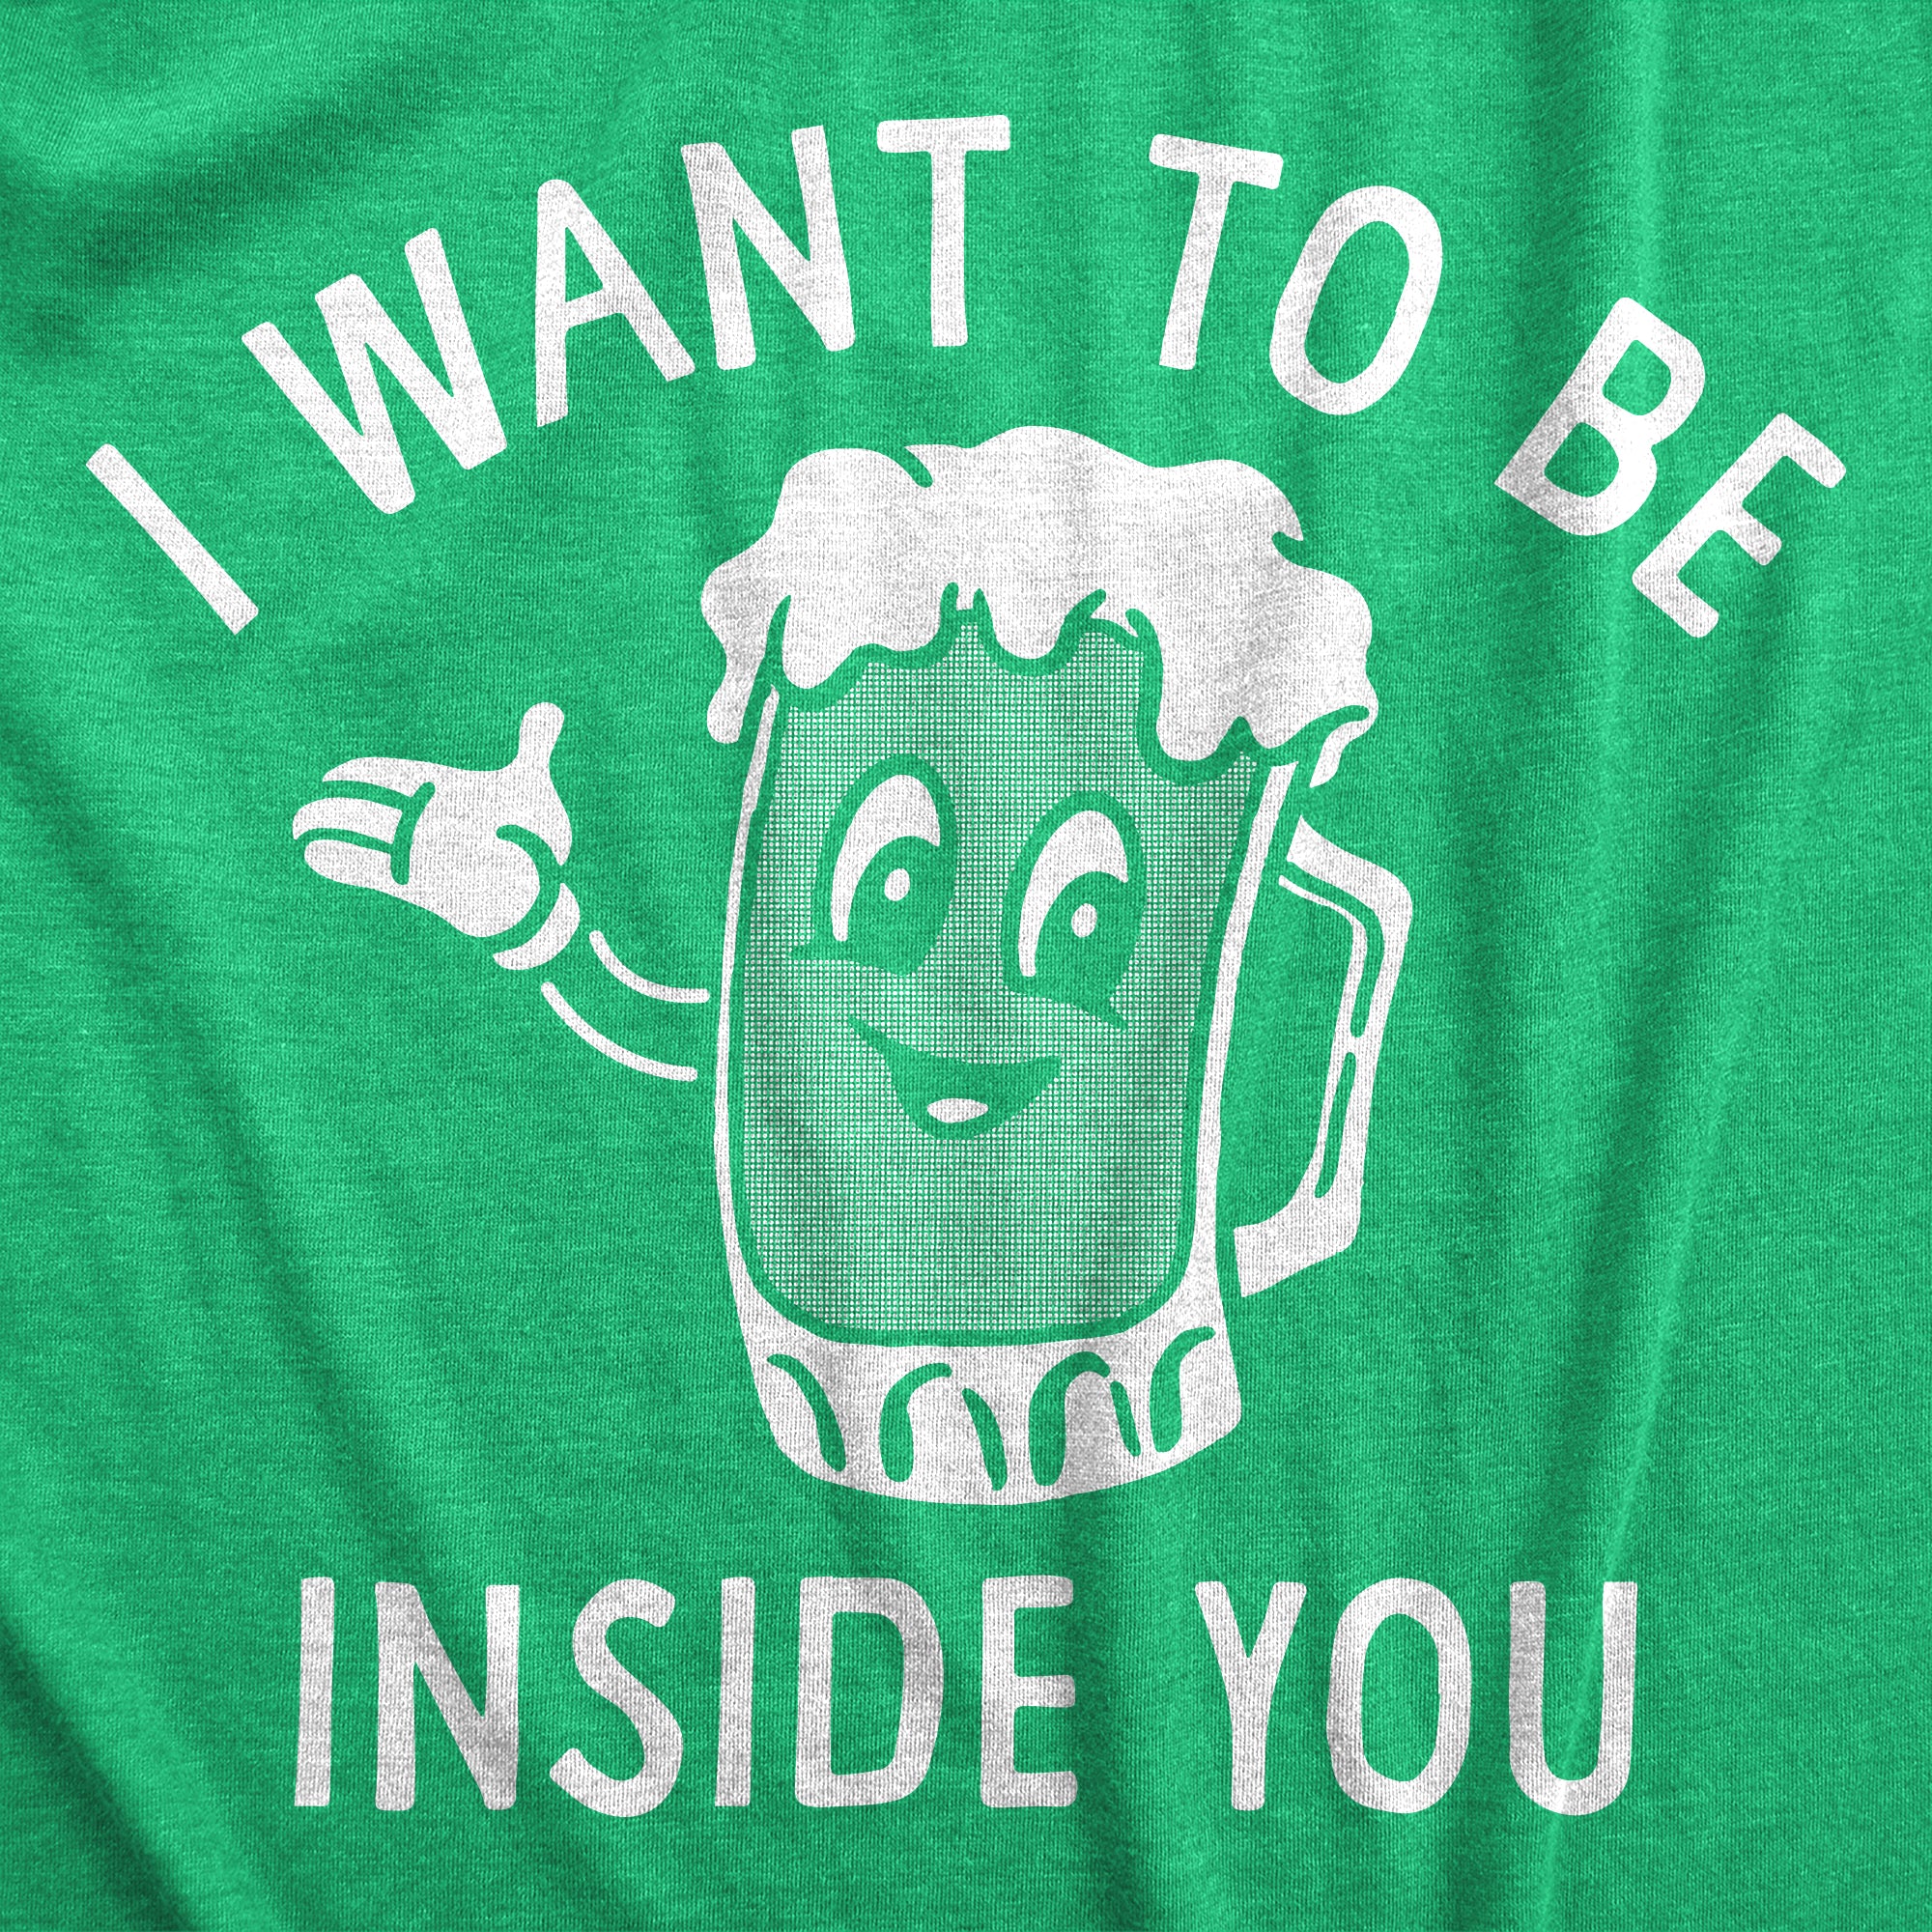 Funny Heather Green - INSIDE I Want To Be Inside You Beer Mens T Shirt Nerdy Beer Drinking Tee